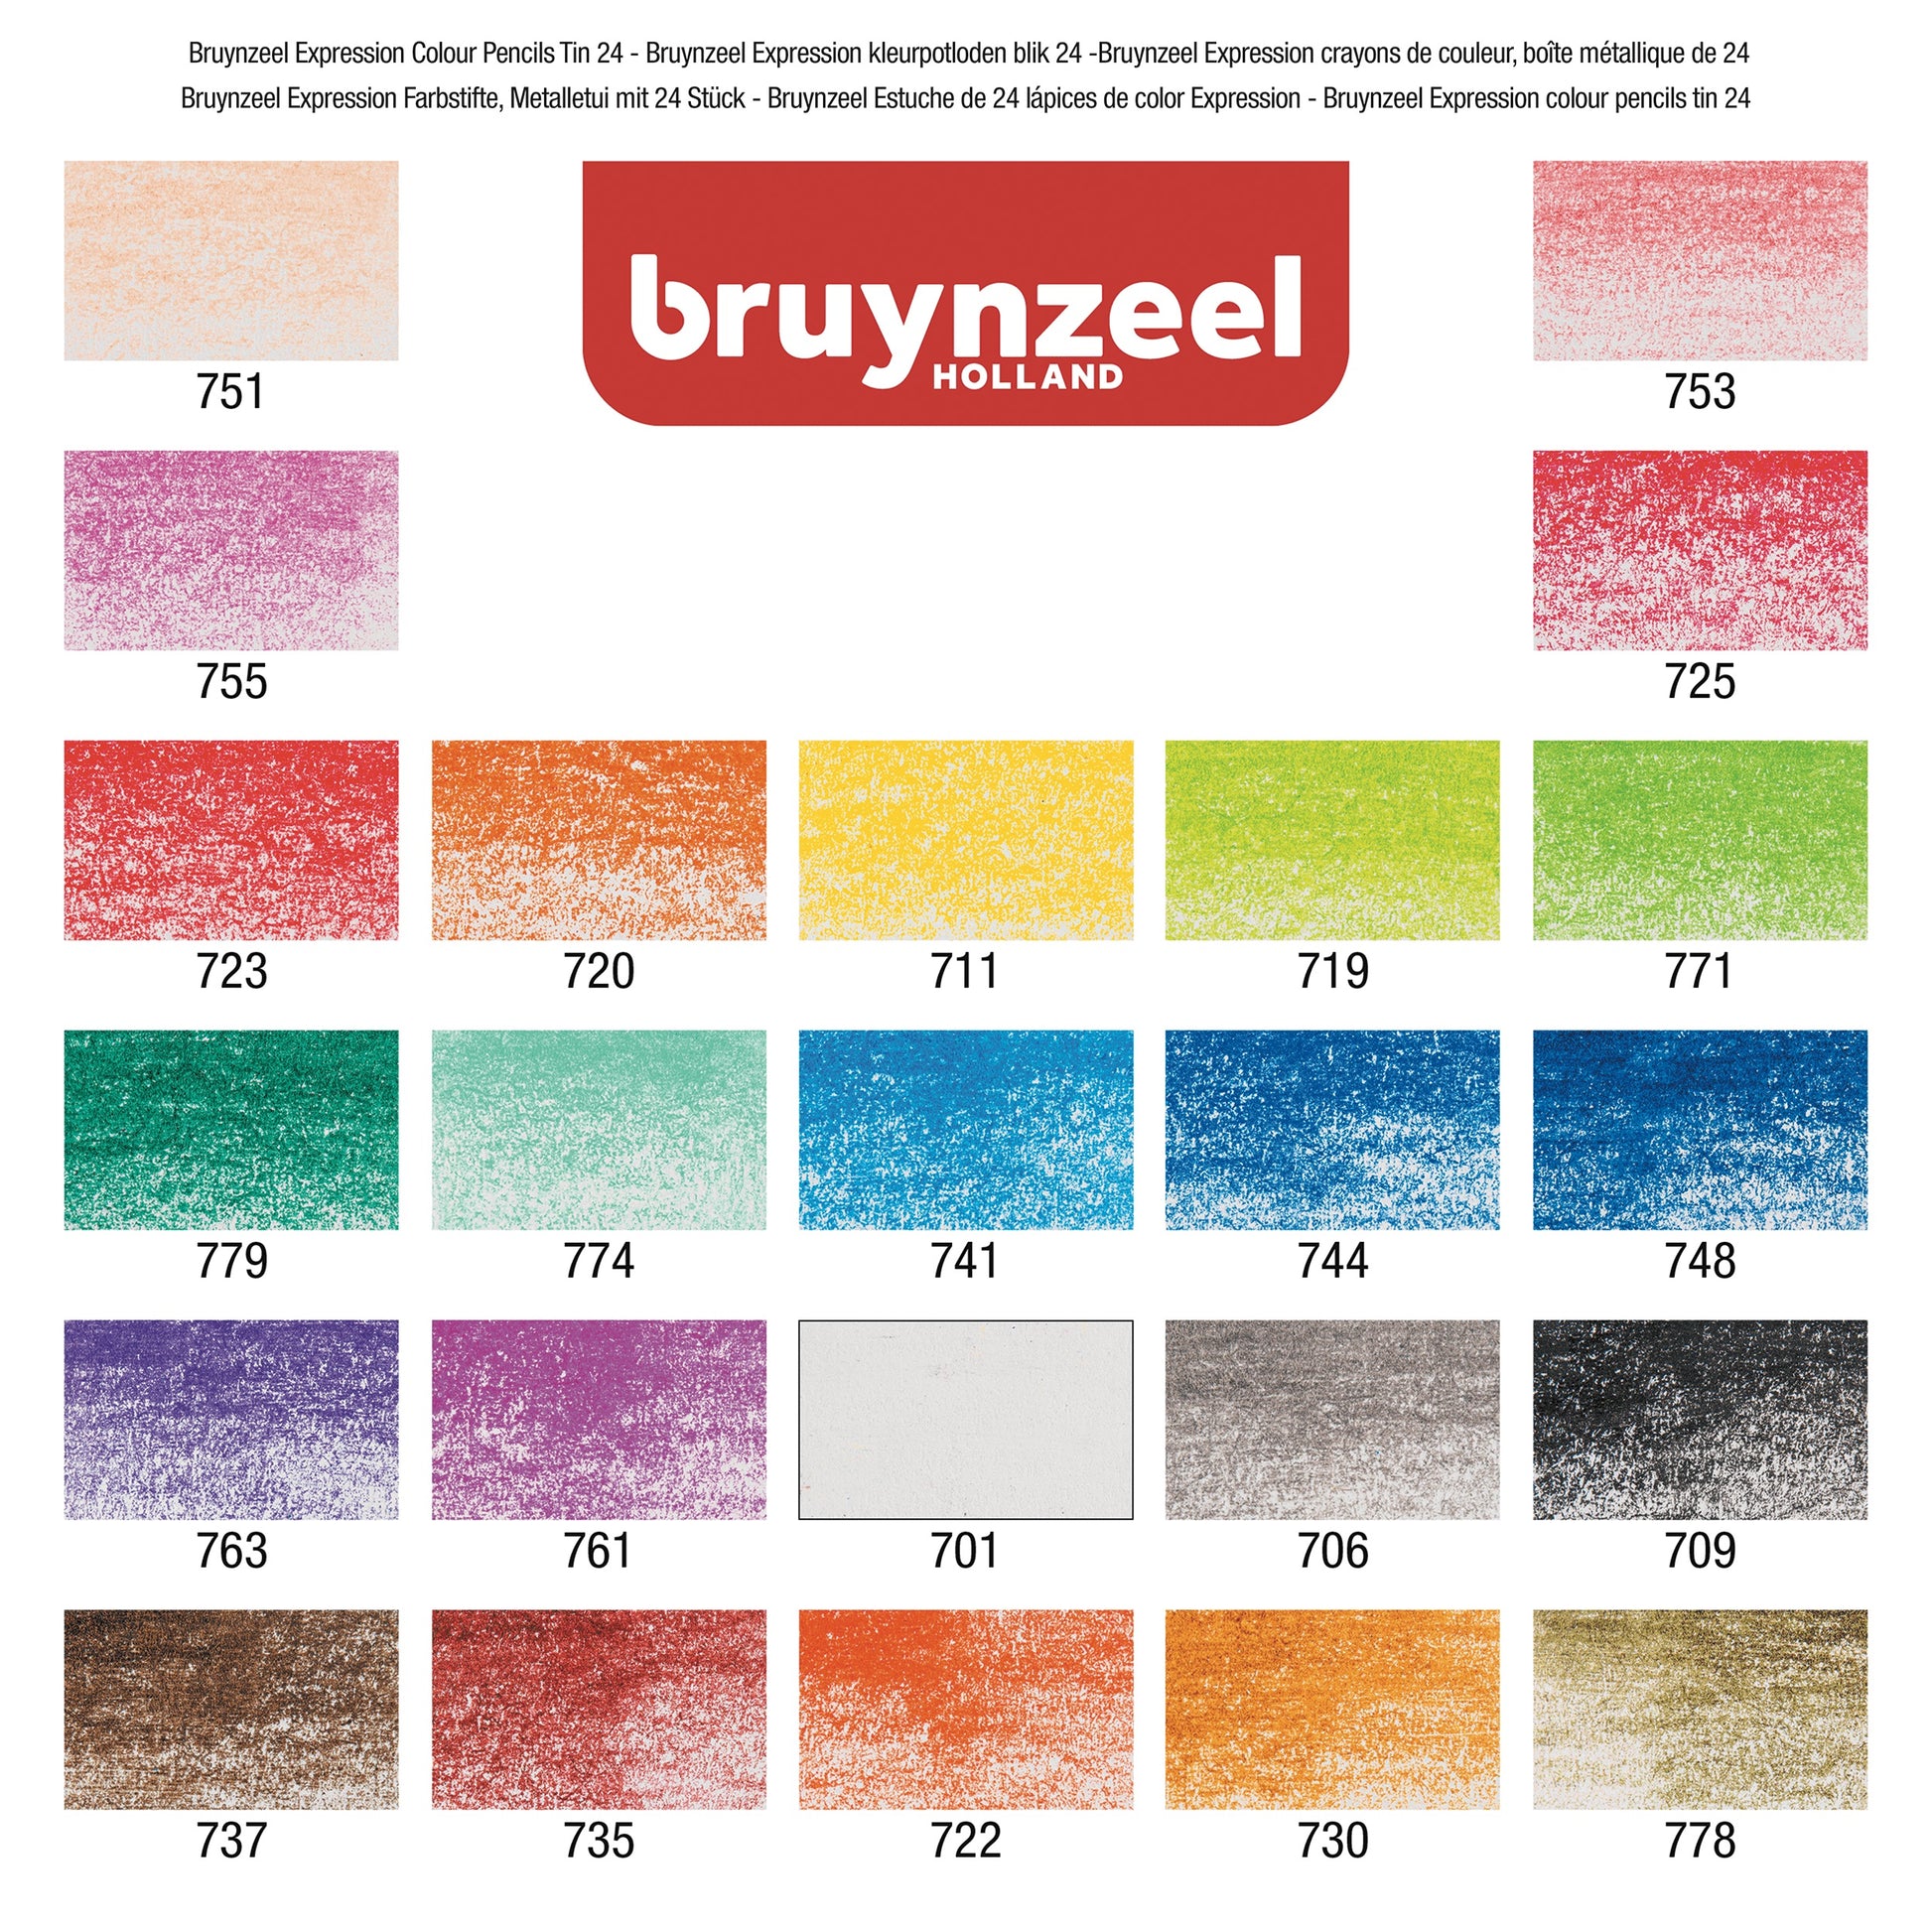 Bruynzeel expression 24 colour pencils tin swatches - Paper Dream